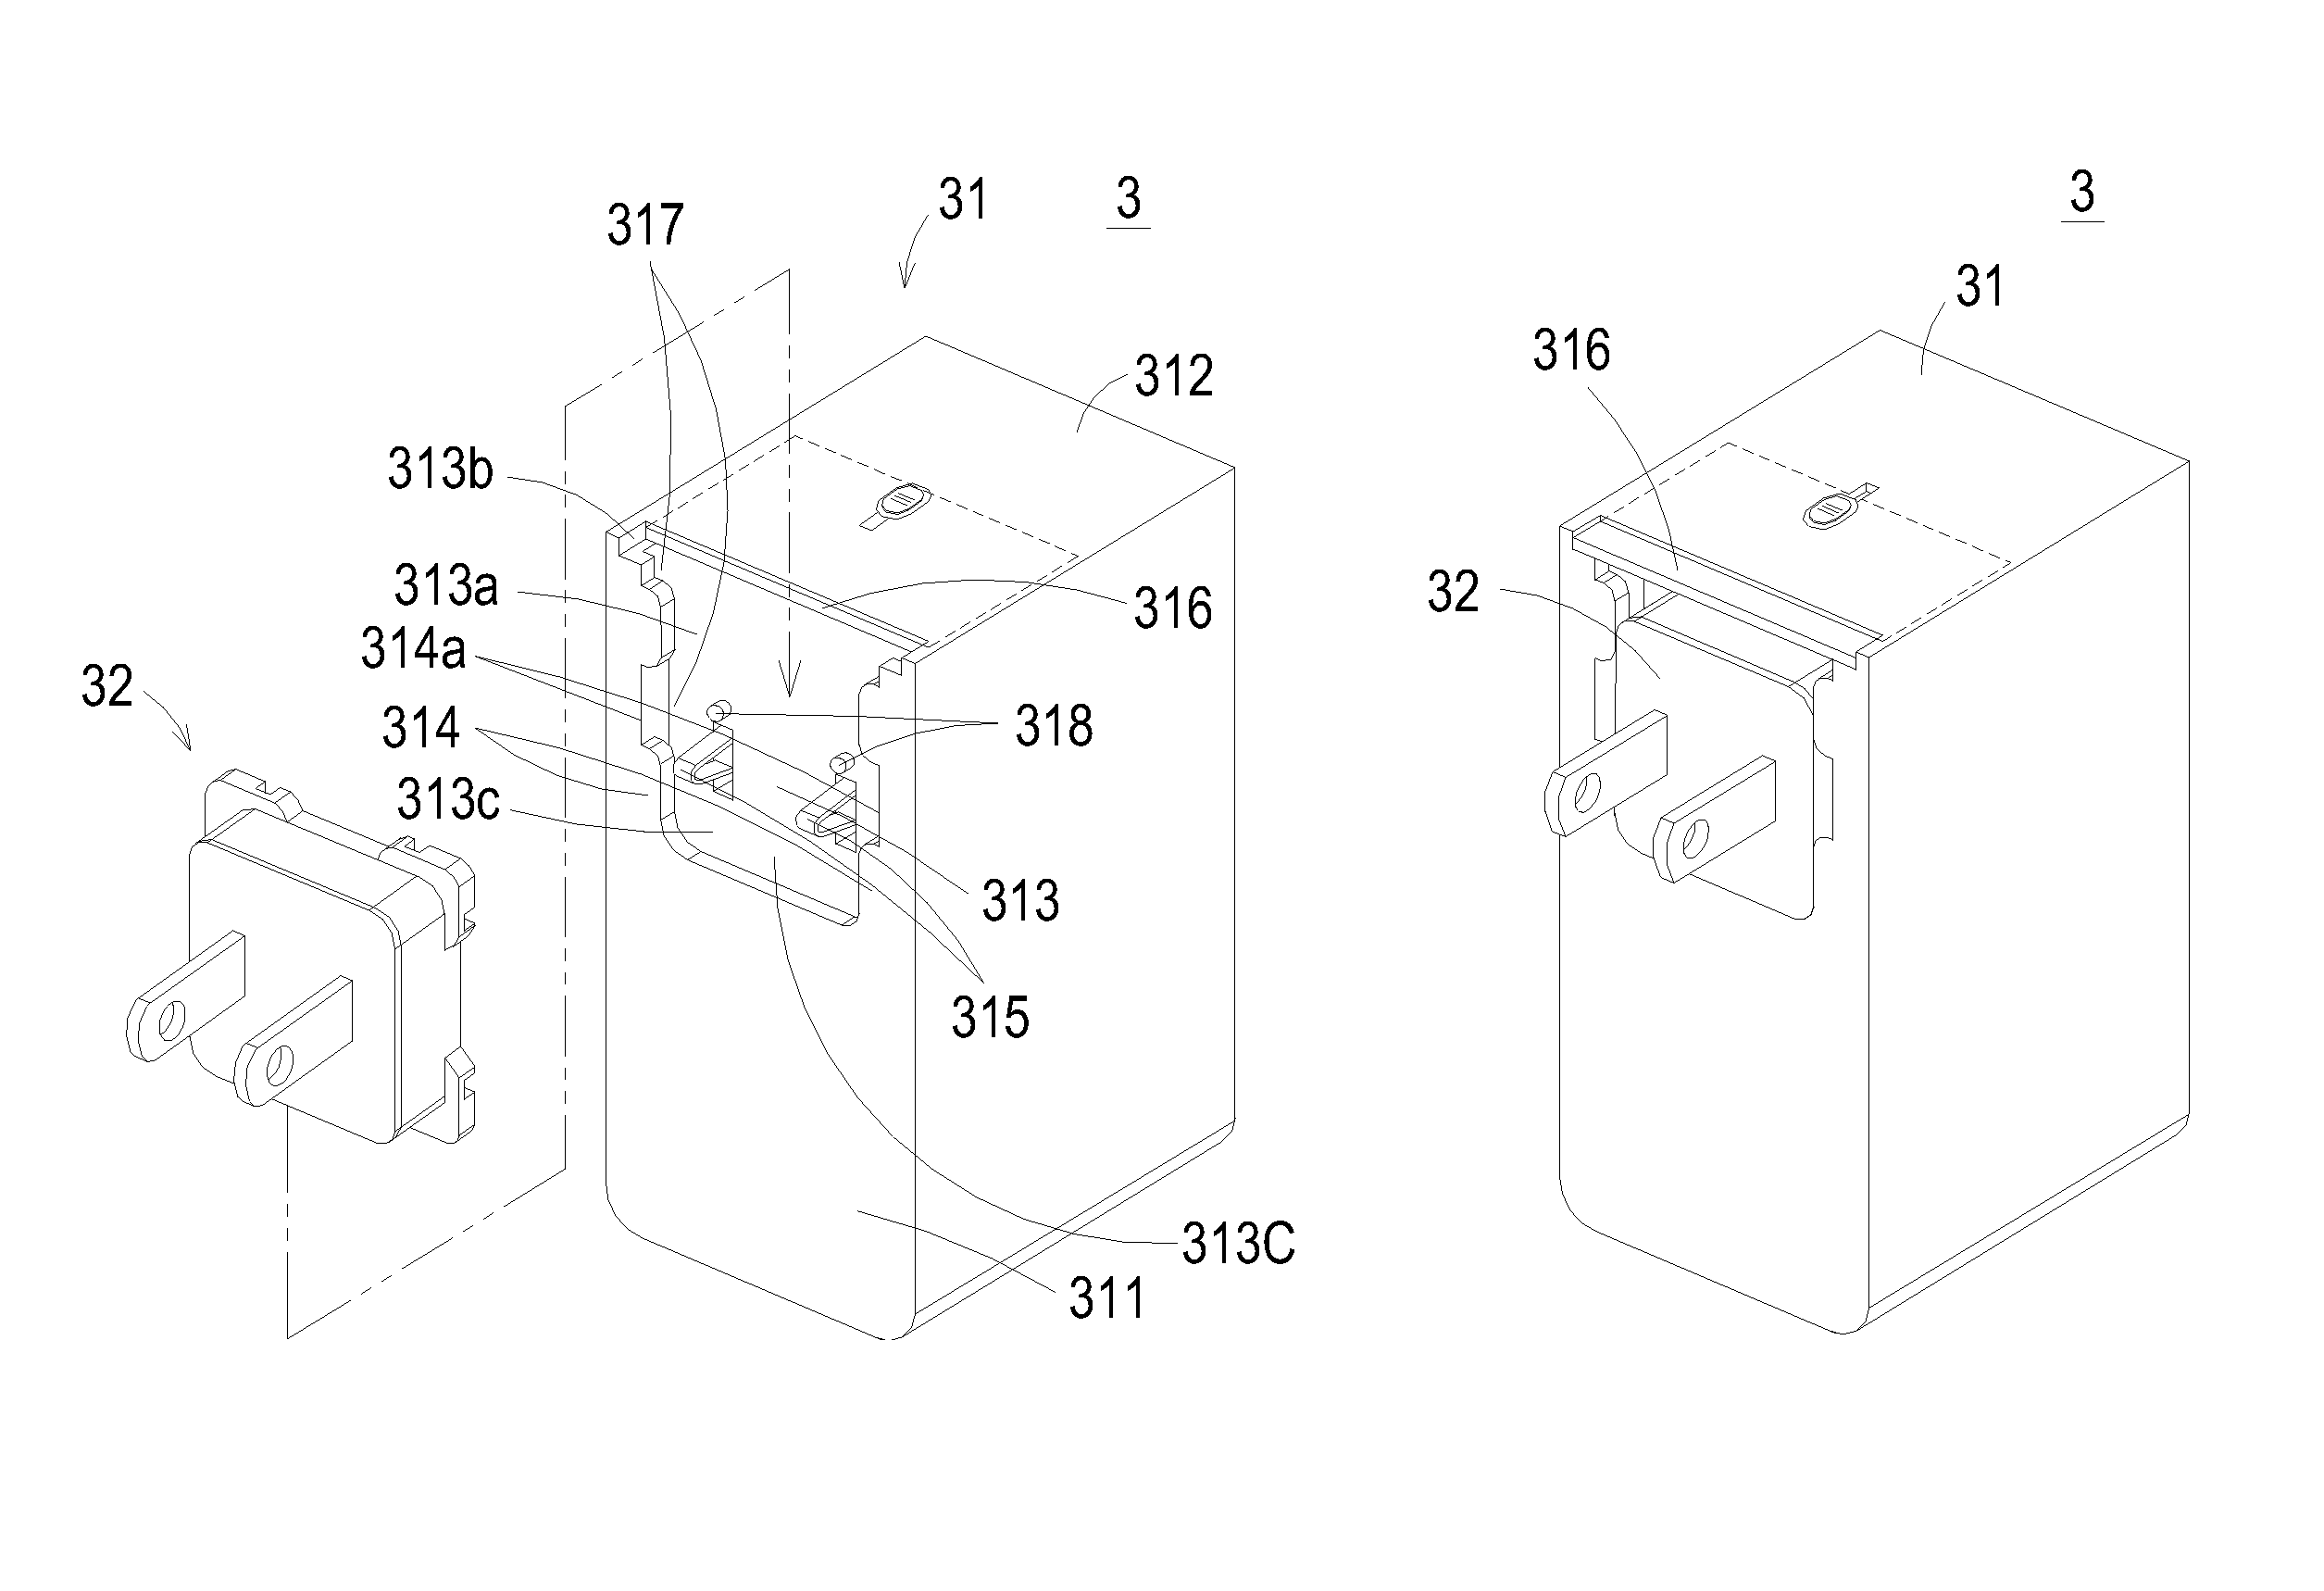 Power adapter with interchangeable connectors and power supply having the same